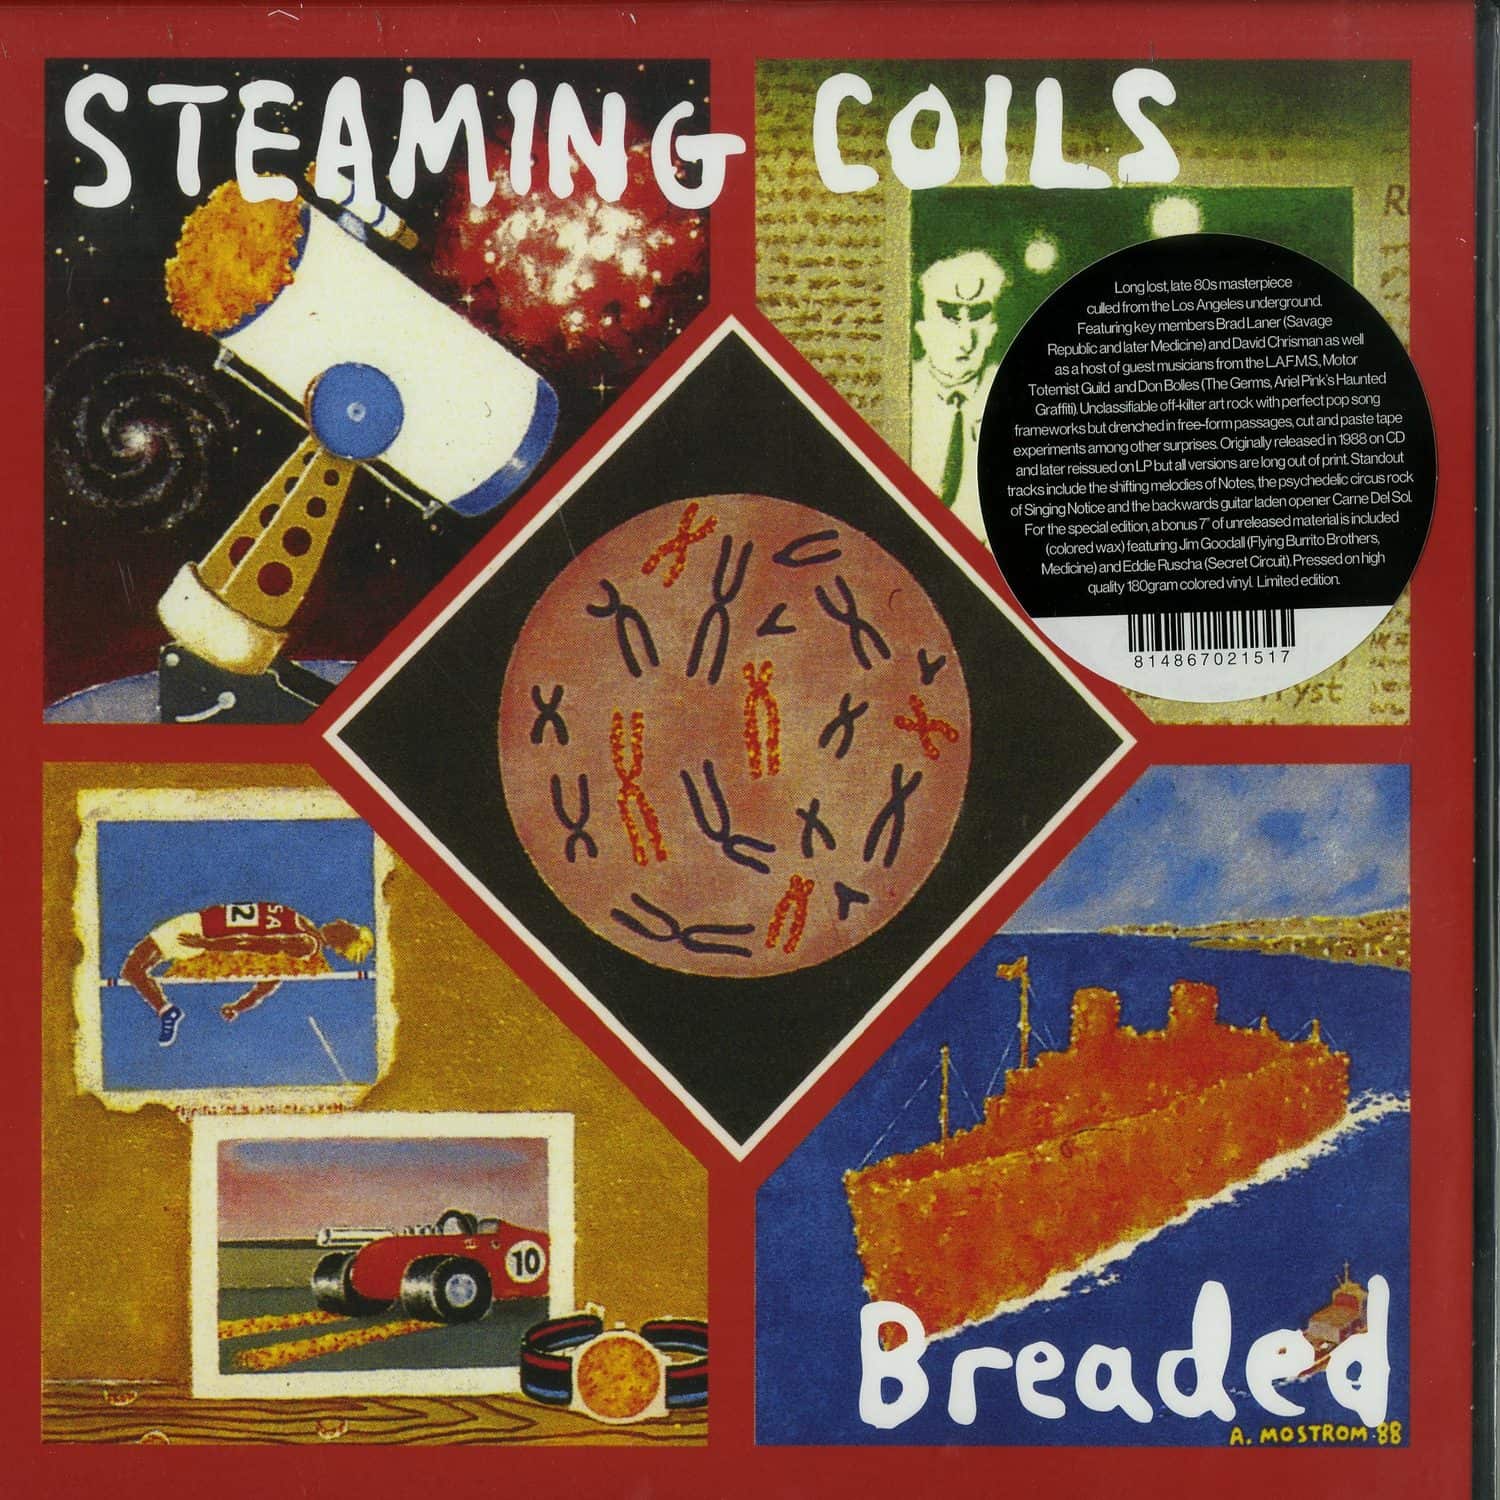 Steaming Coils - BREADED 